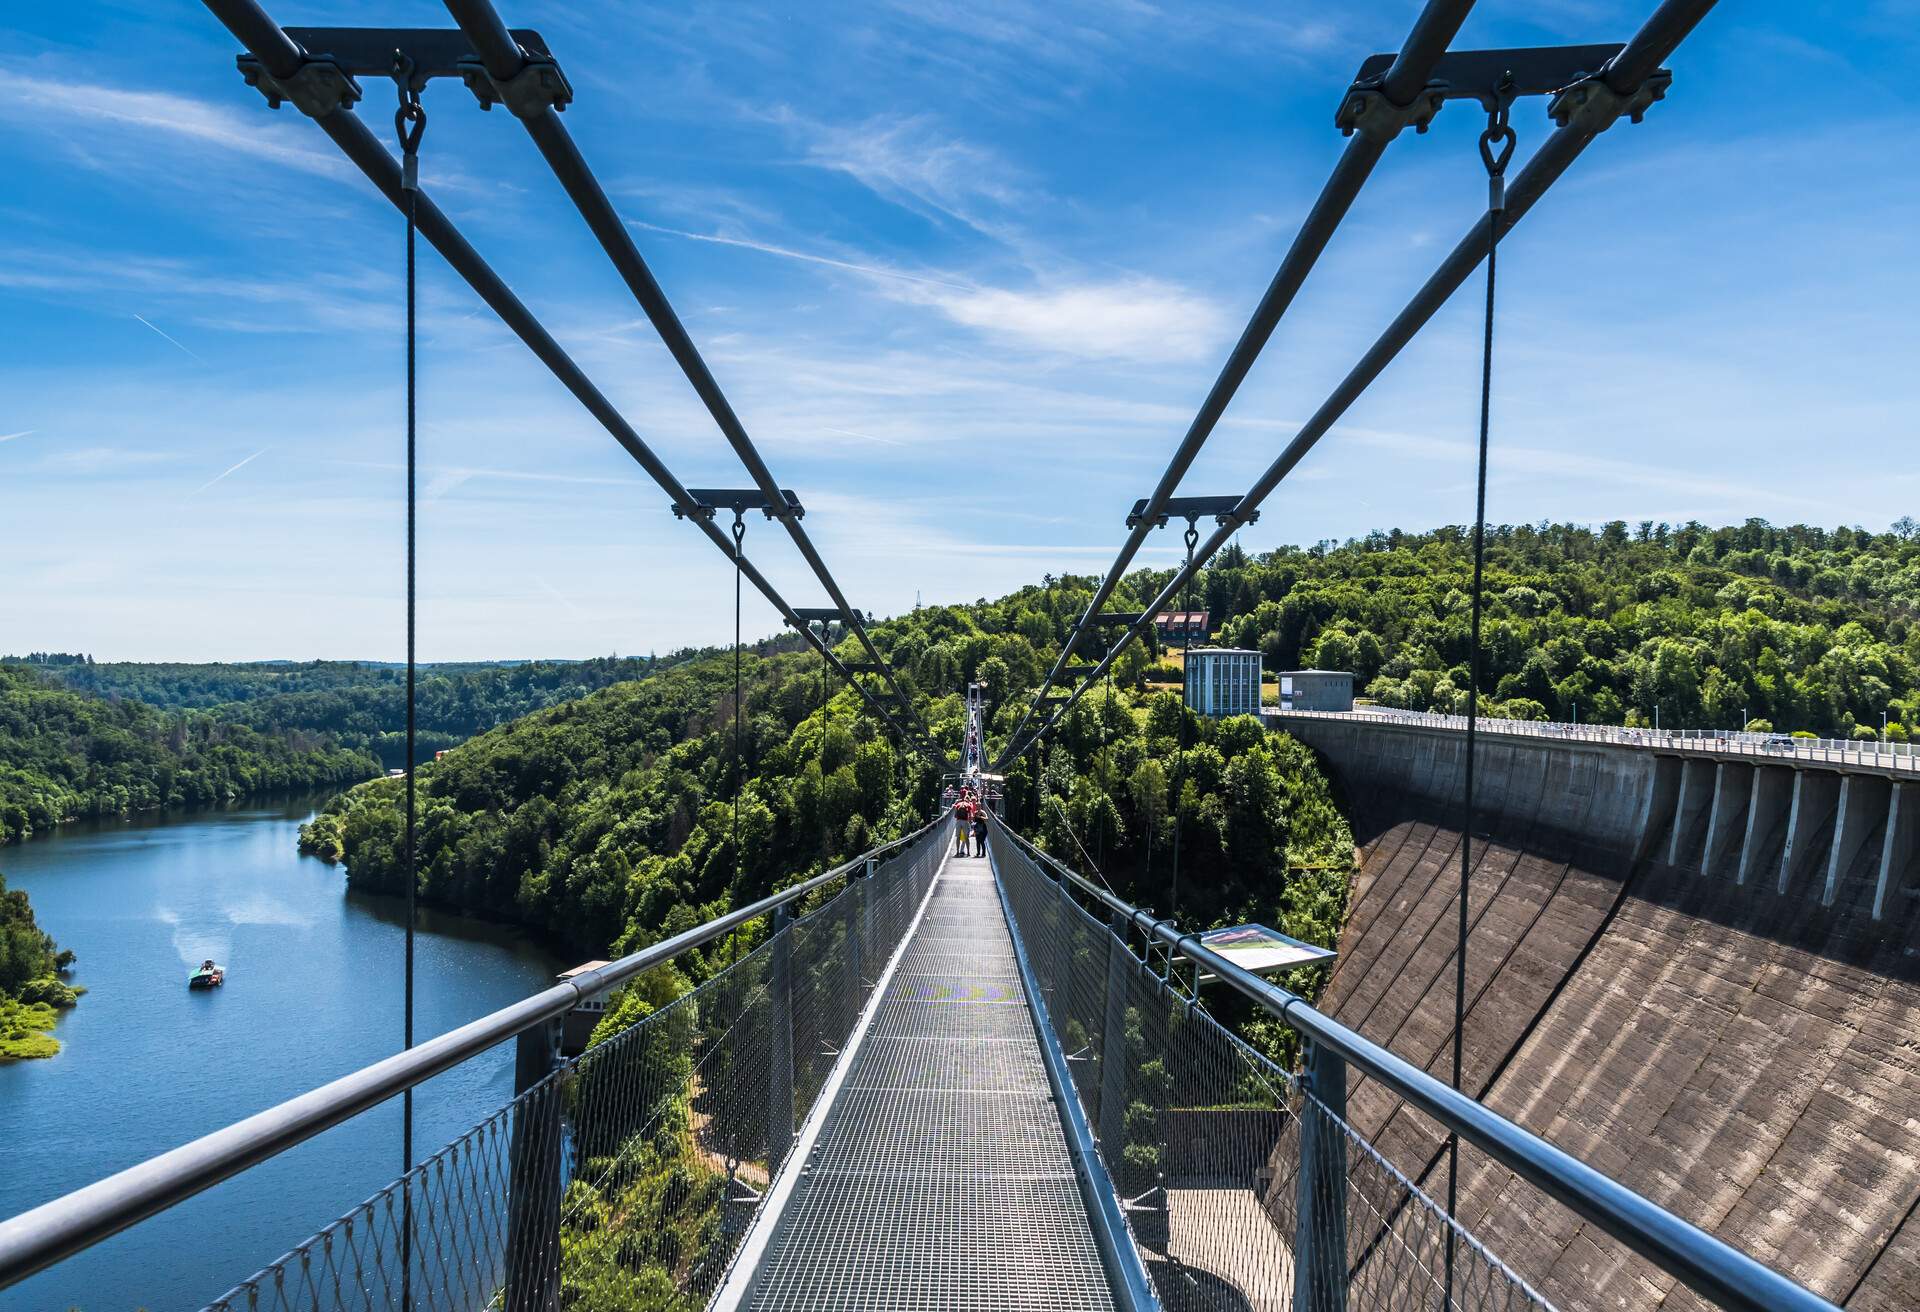 Titan RT rope suspension bridge over the Rappbodetalsperre (rappbode dam) in the Harz Mountains in Germany. In 2017, it held the record as longest suspension bridge of this type in the world.